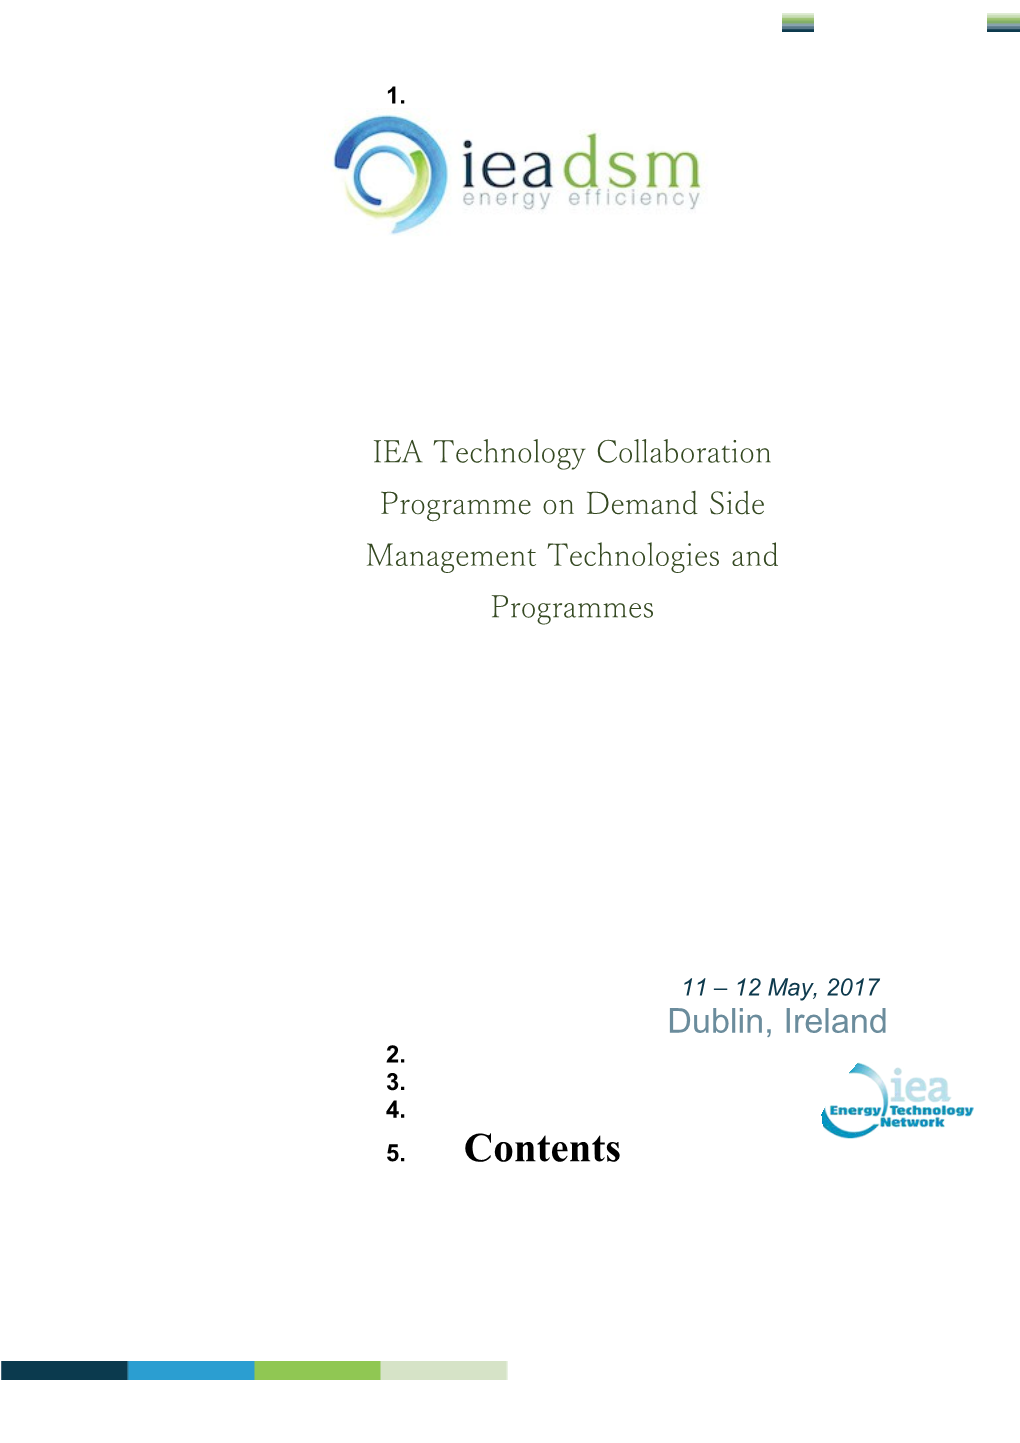 IEA Technology Collaboration Programme on Demand Side Management Technologies and Programmes